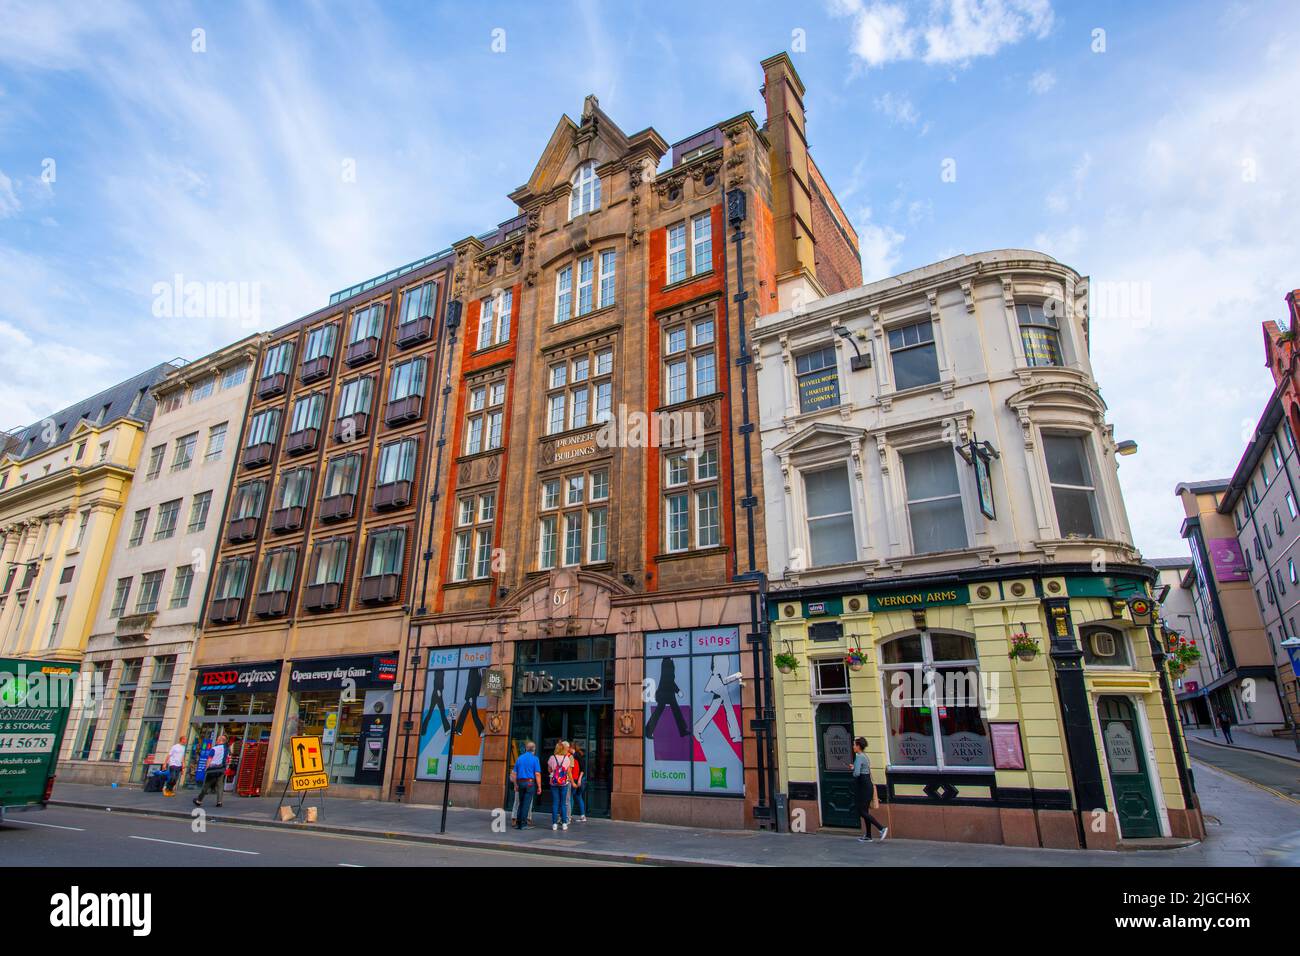 Pioneer Building at 67 Dale Street in city center of Liverpool, Merseyside, UK. Liverpool Maritime Mercantile City is a UNESCO World Heritage Site. Stock Photo